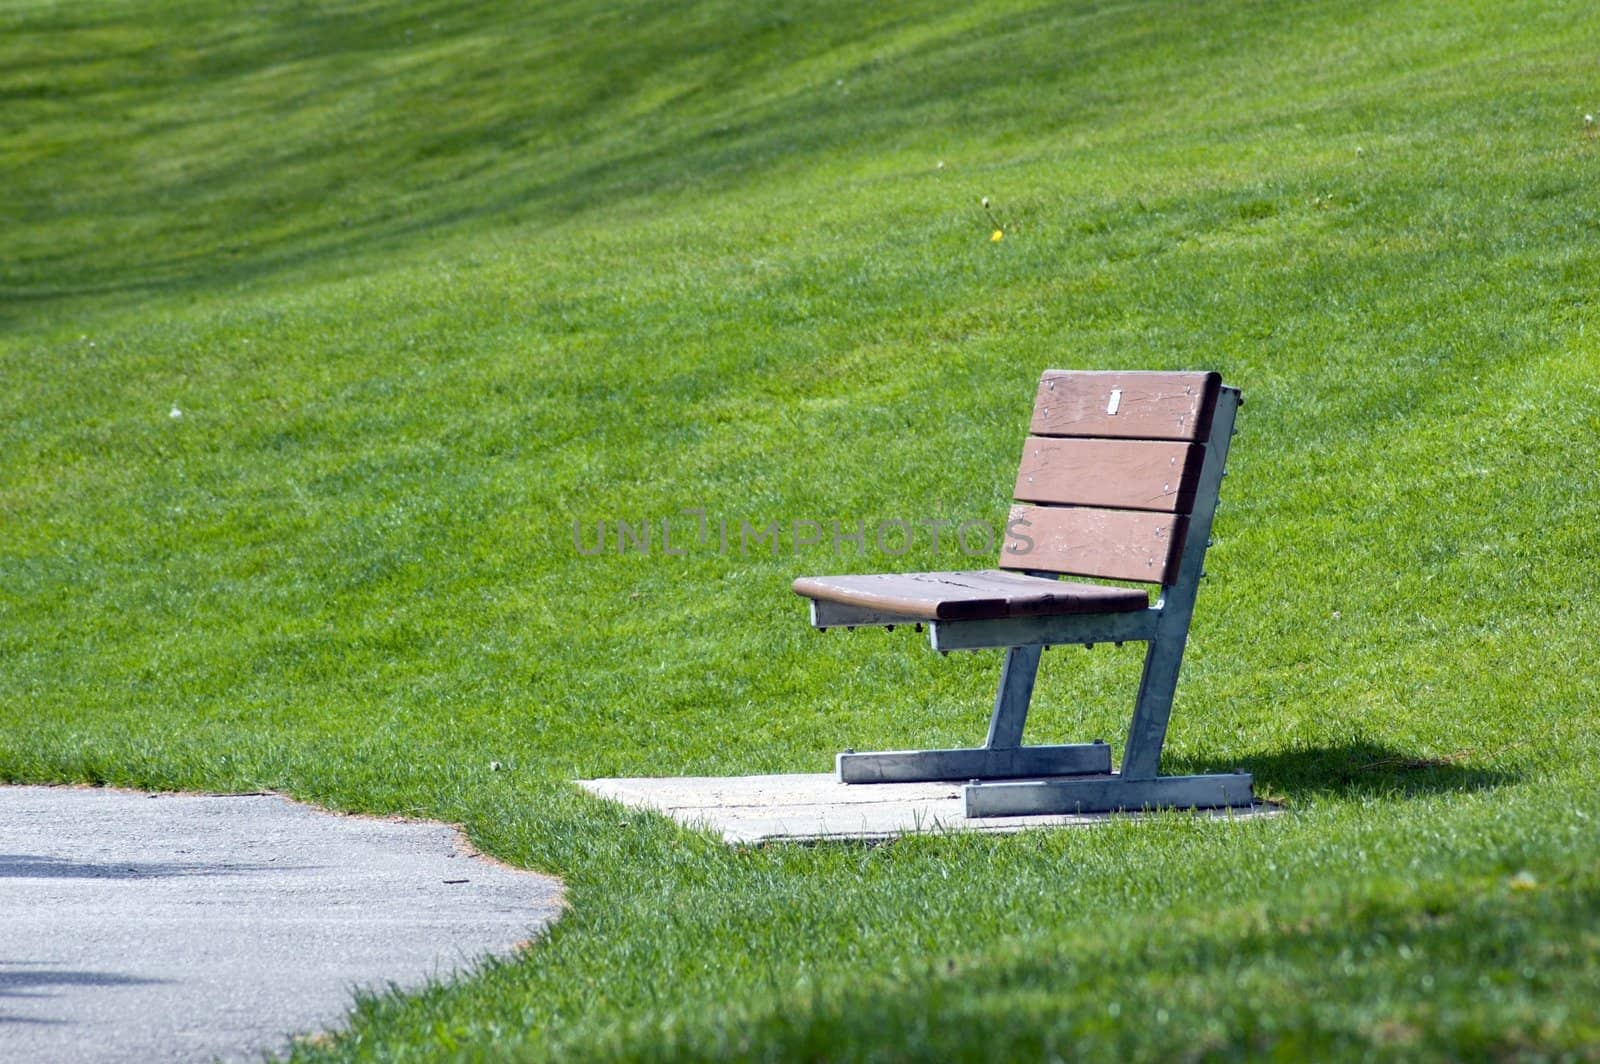 Alone bench close to path in park